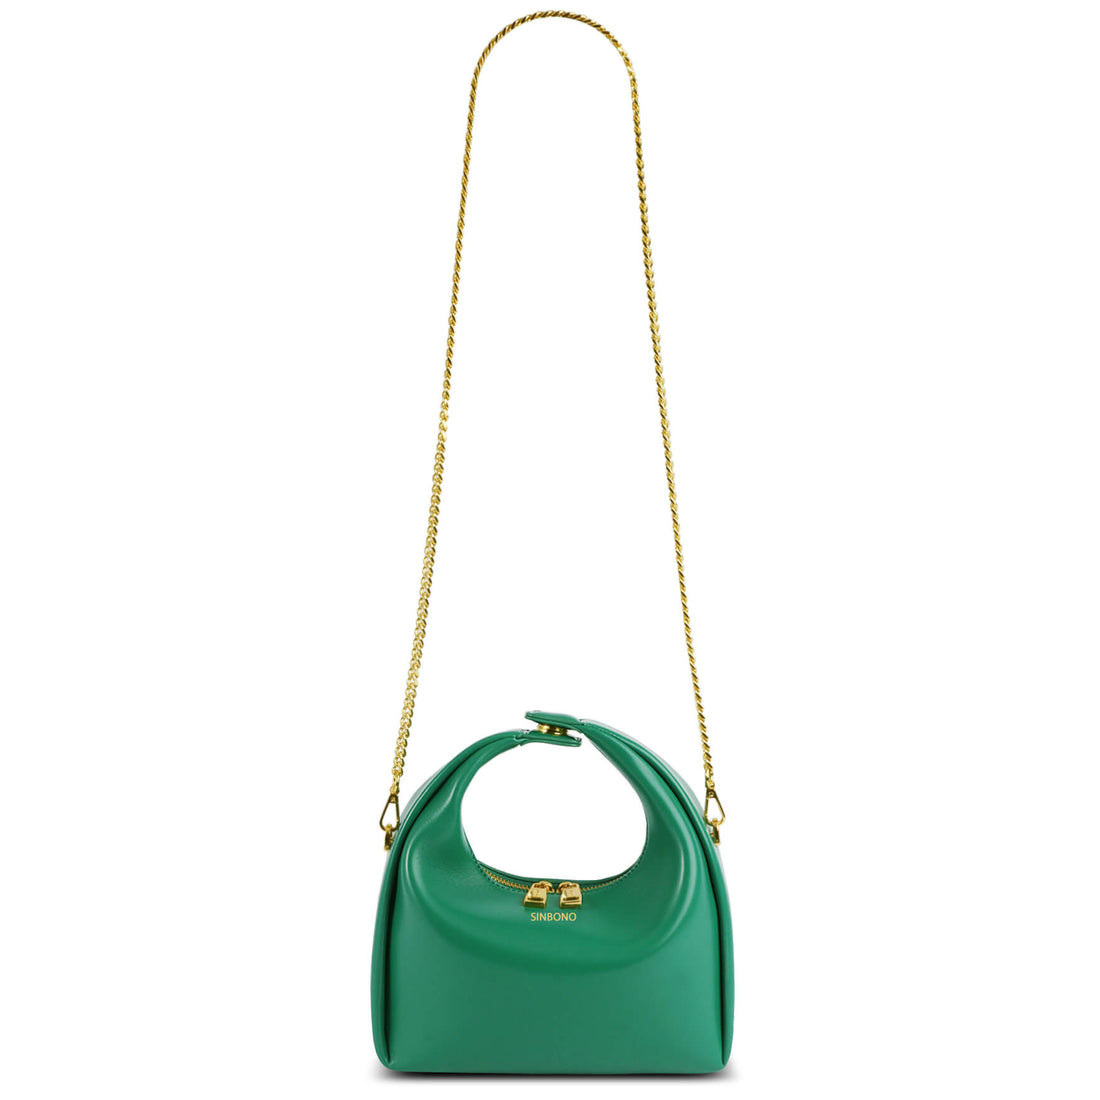 SINBONO Eco-friendly Green Purse with Top Handle & Golden Metal Strap